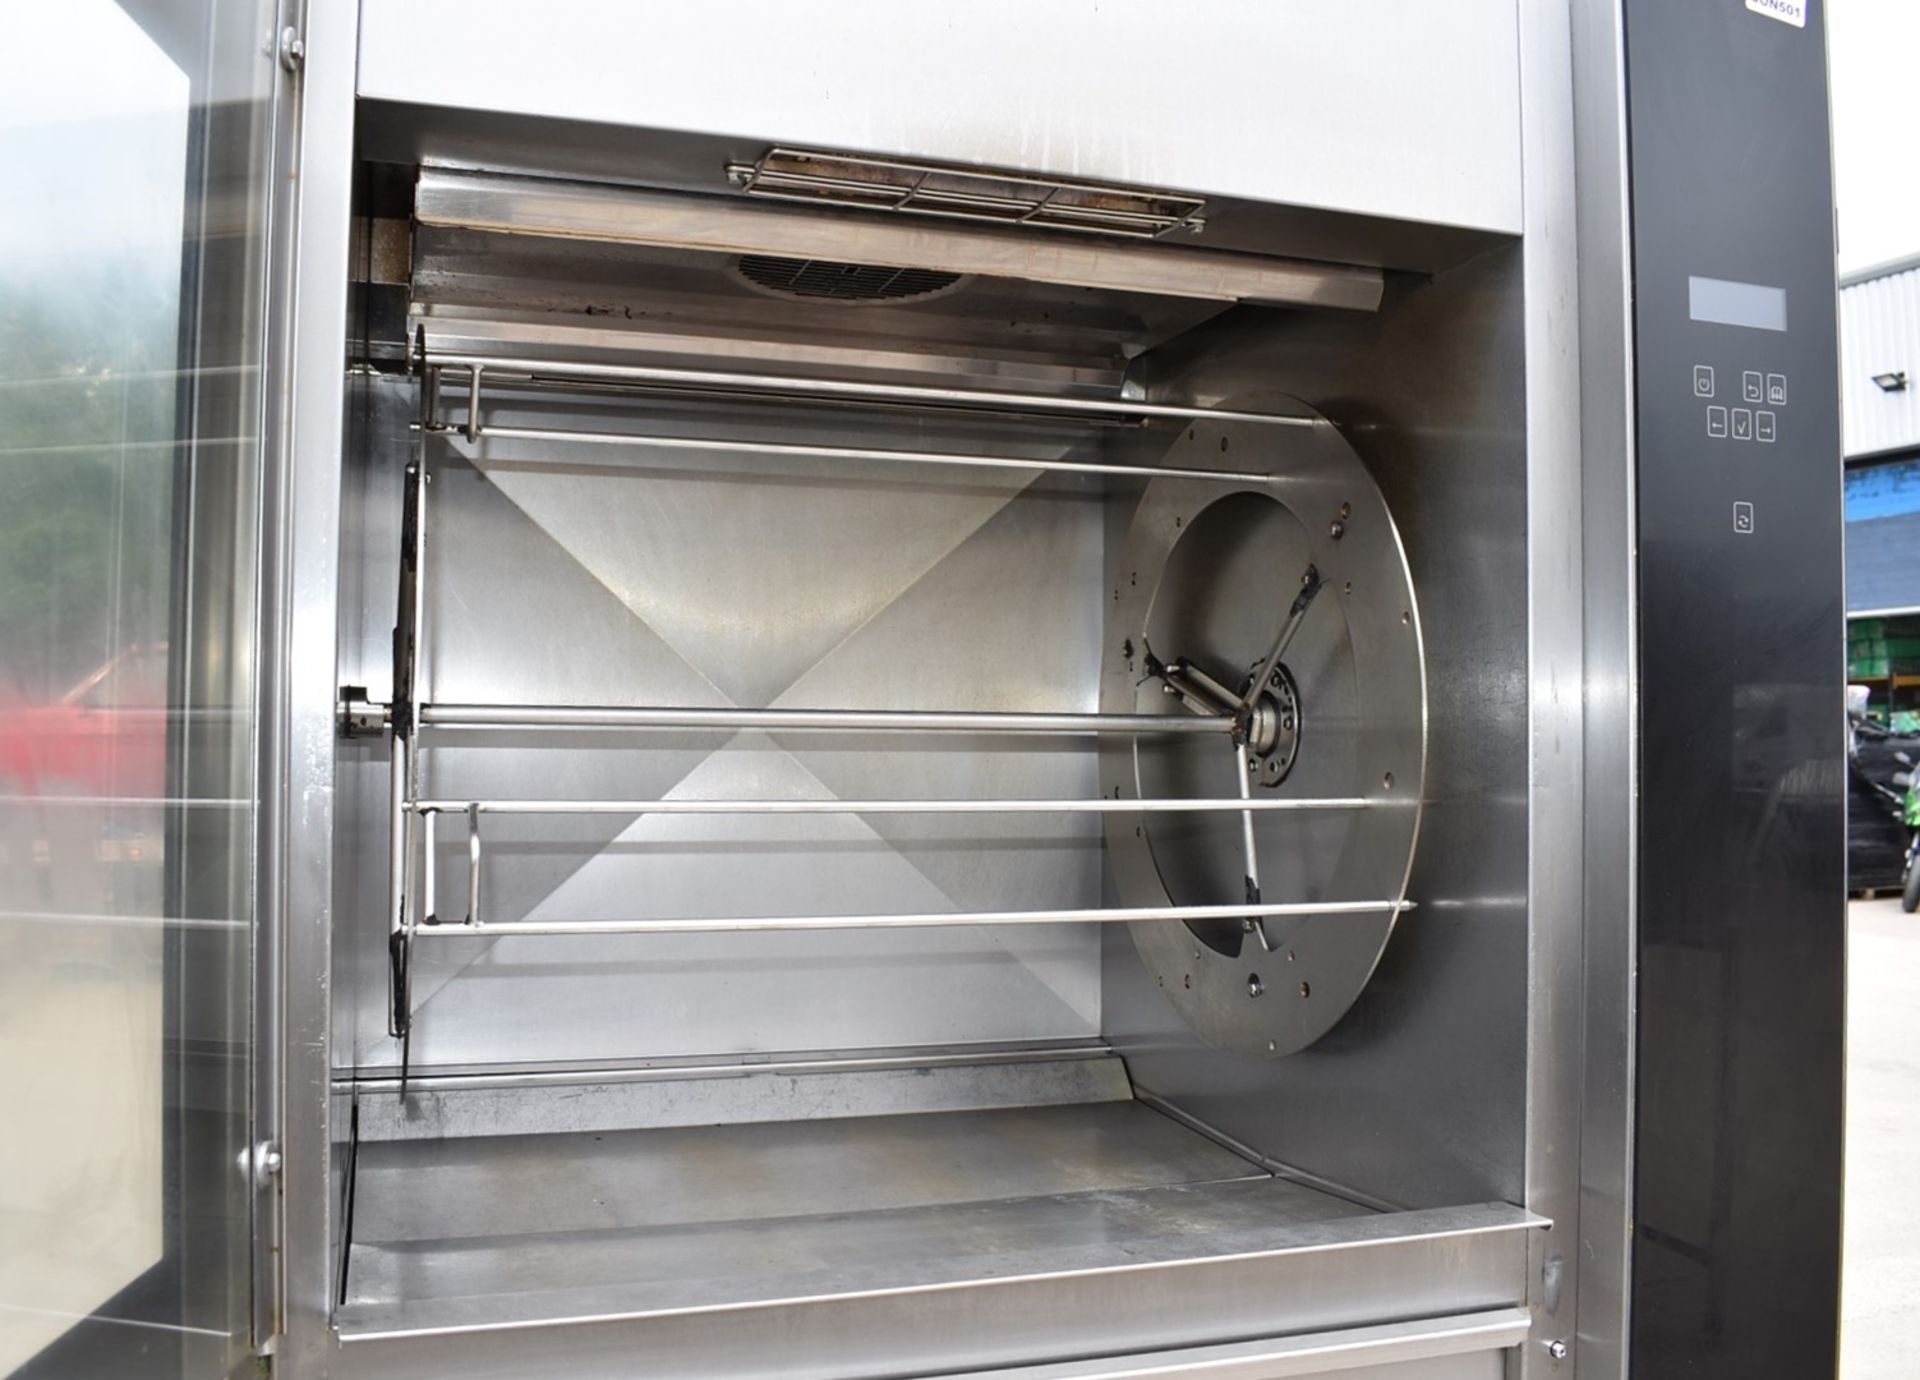 1 x Houno Electric Combi Oven and Fri-jado Rotisserie Oven Combo With Stand - 3 Phase - Image 13 of 22